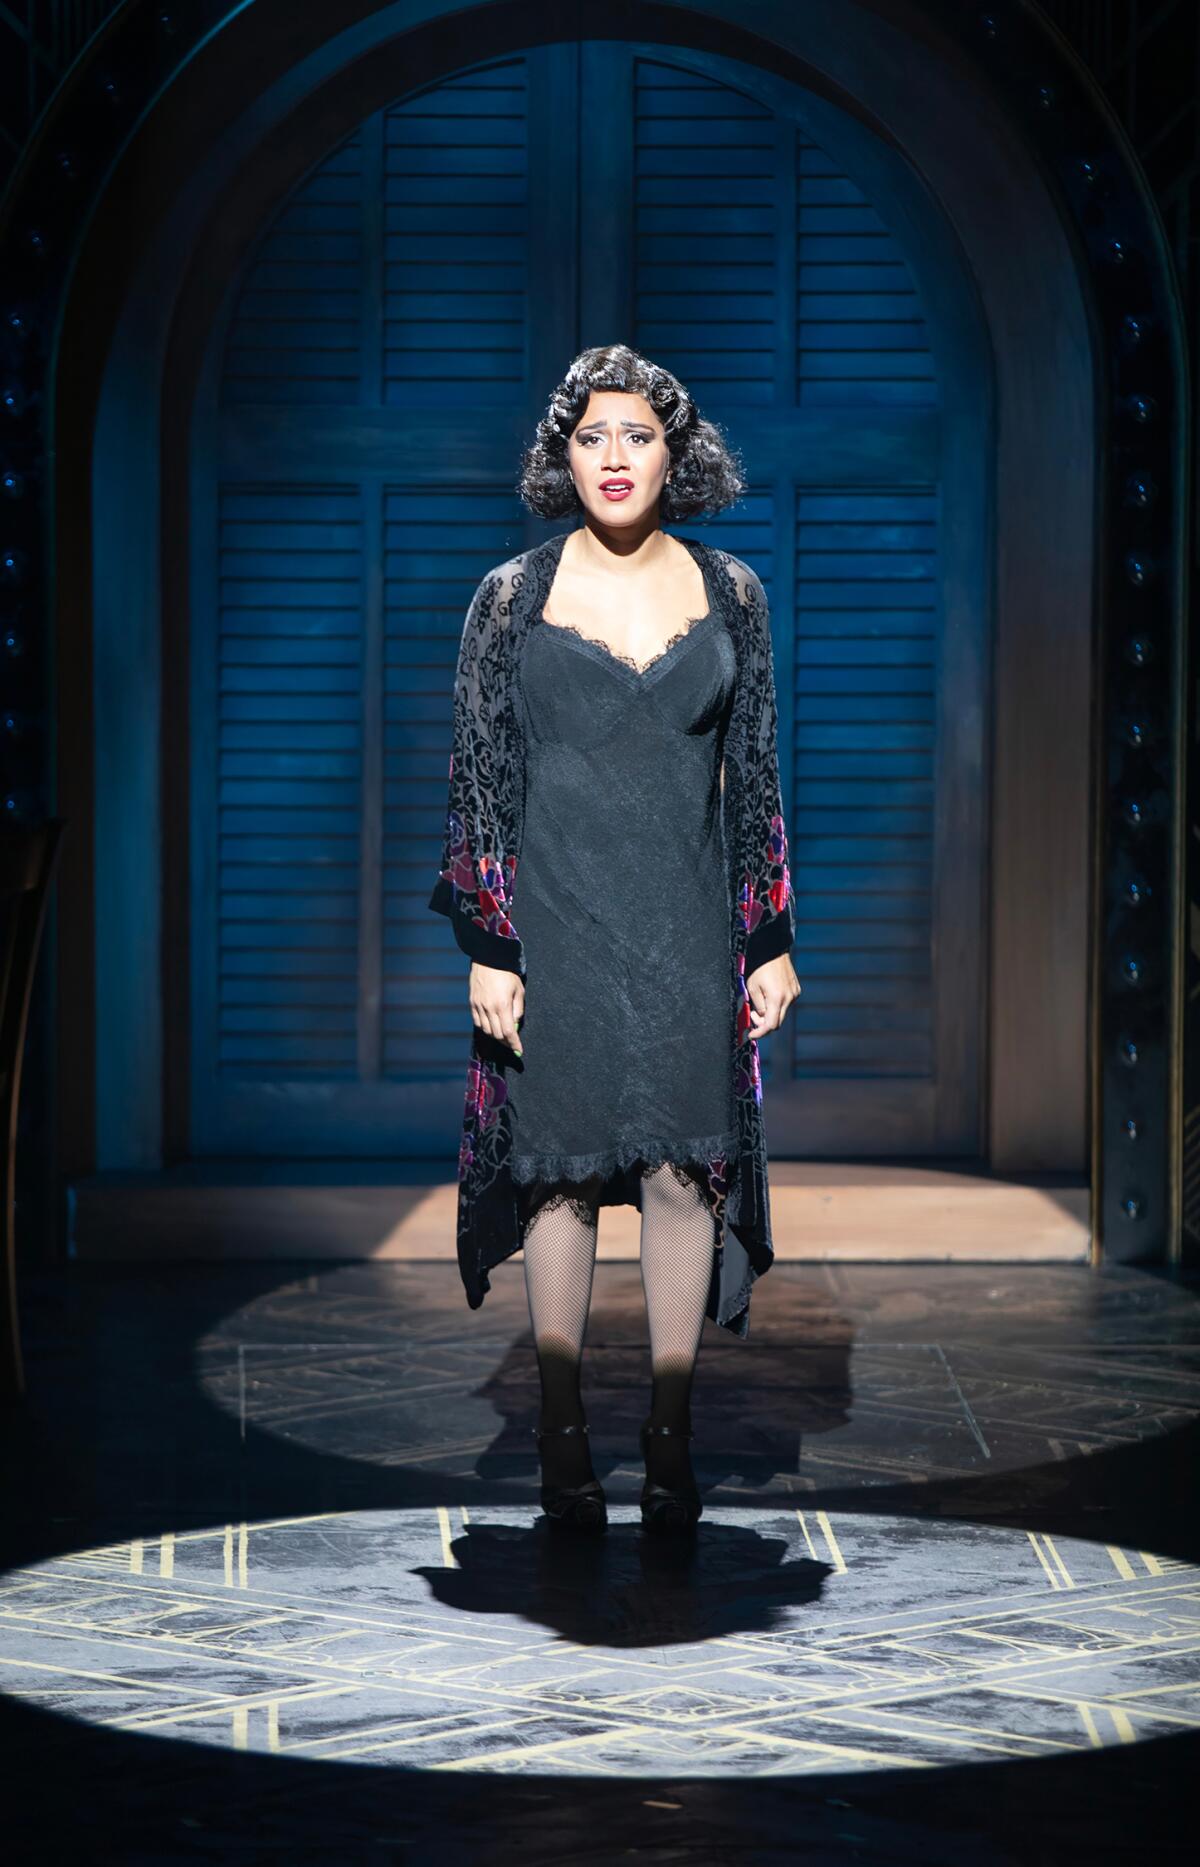 Joanna A. Jones as Sally Bowles in "Cabaret" at The Old Globe.